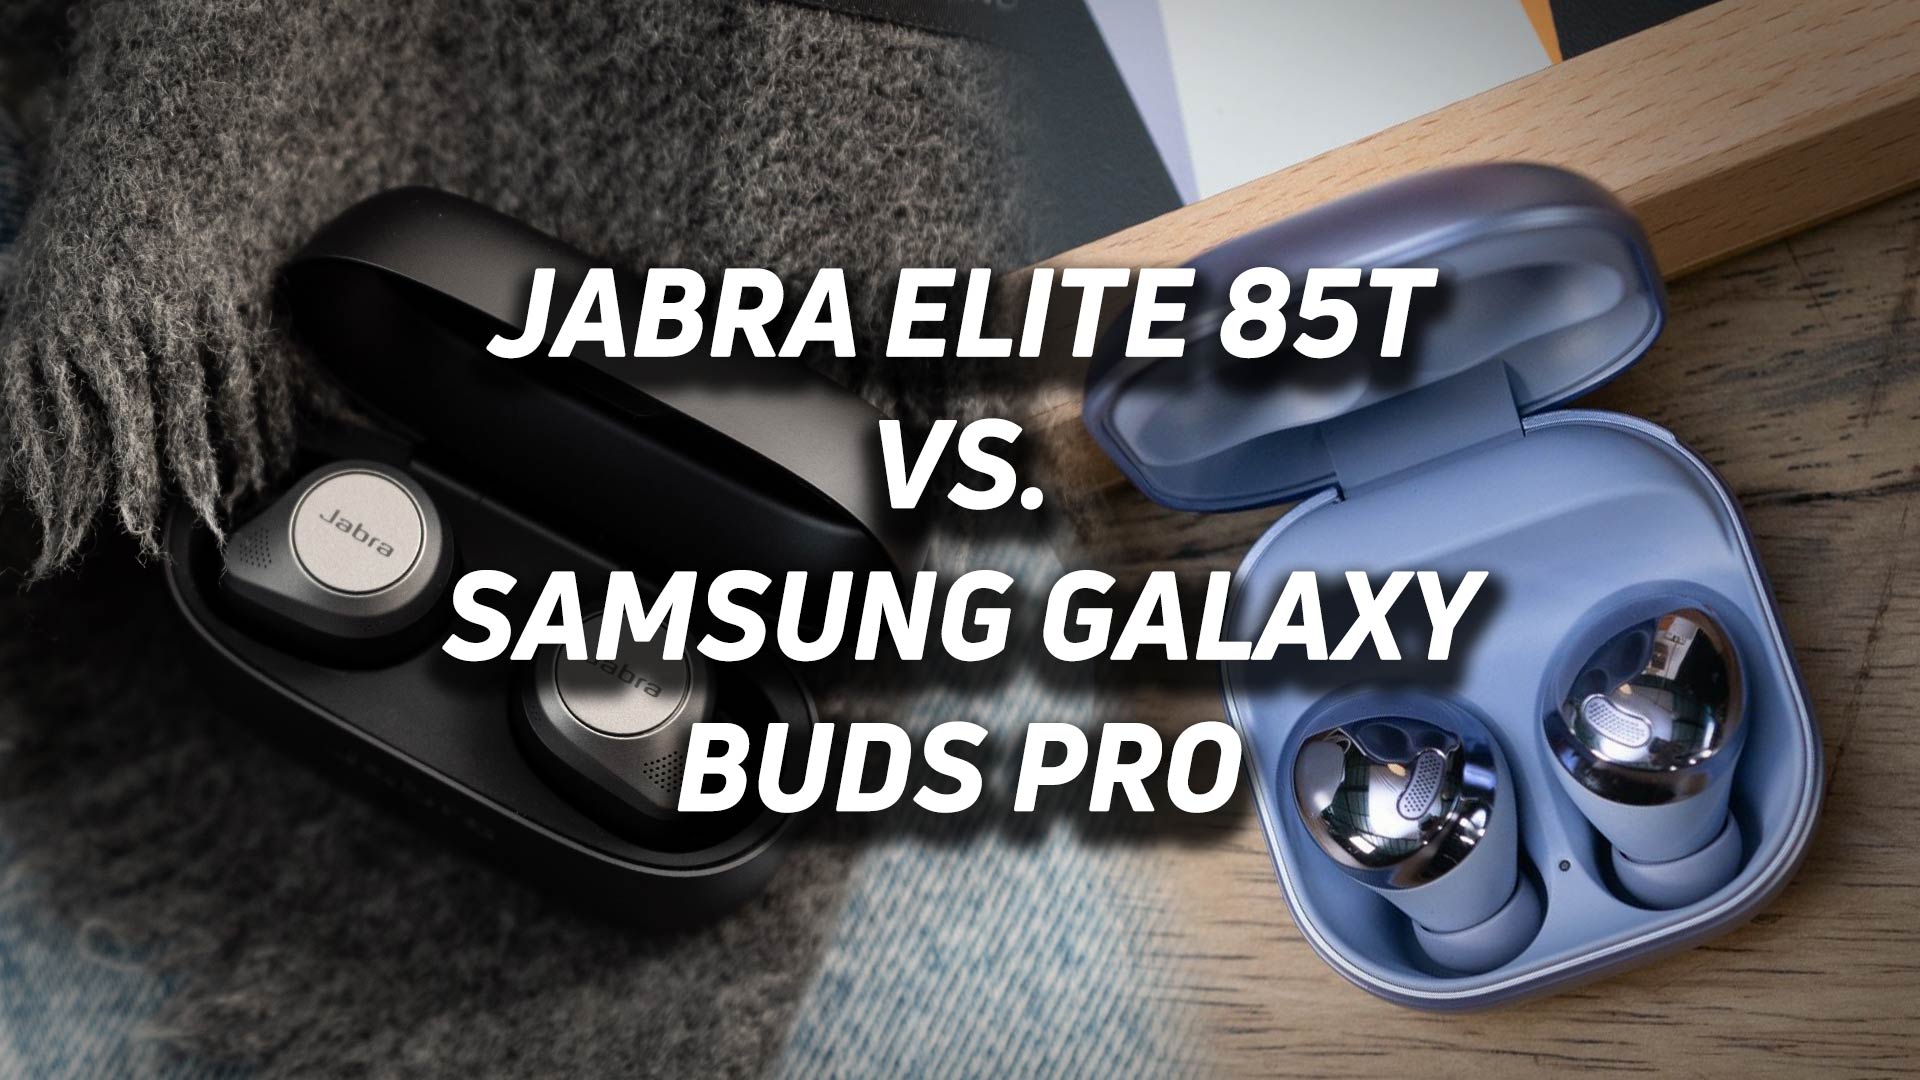 The Jabra Elite 85t and Samsung Galaxy Buds Pro noises canceling headphones blended together into one image with versus text overlaid.